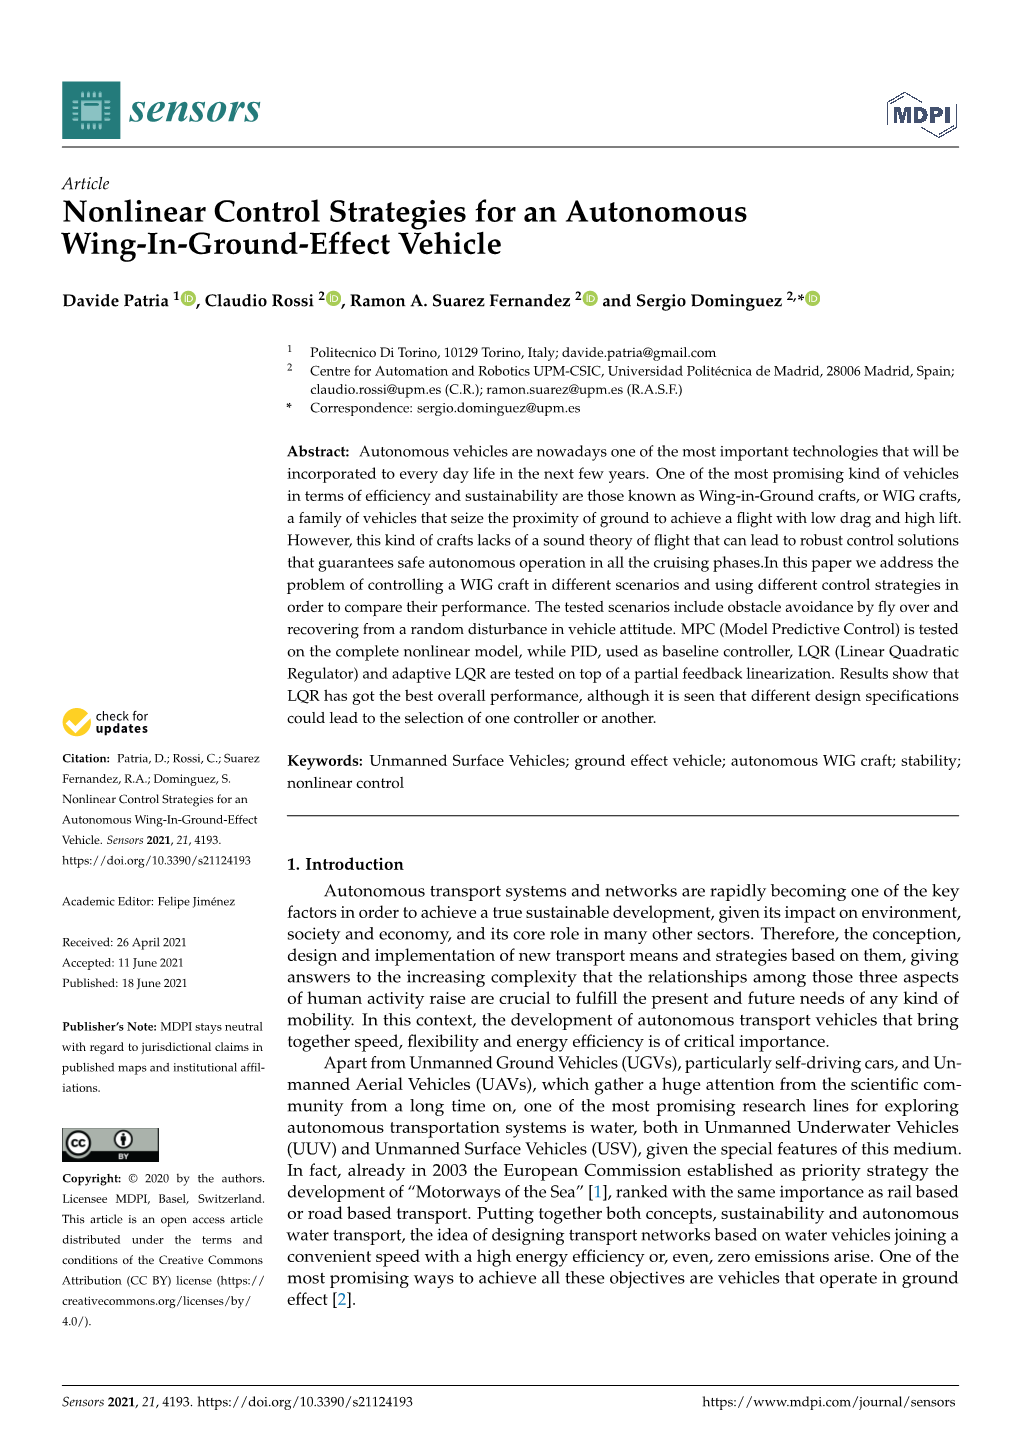 Nonlinear Control Strategies for an Autonomous Wing-In-Ground-Effect Vehicle